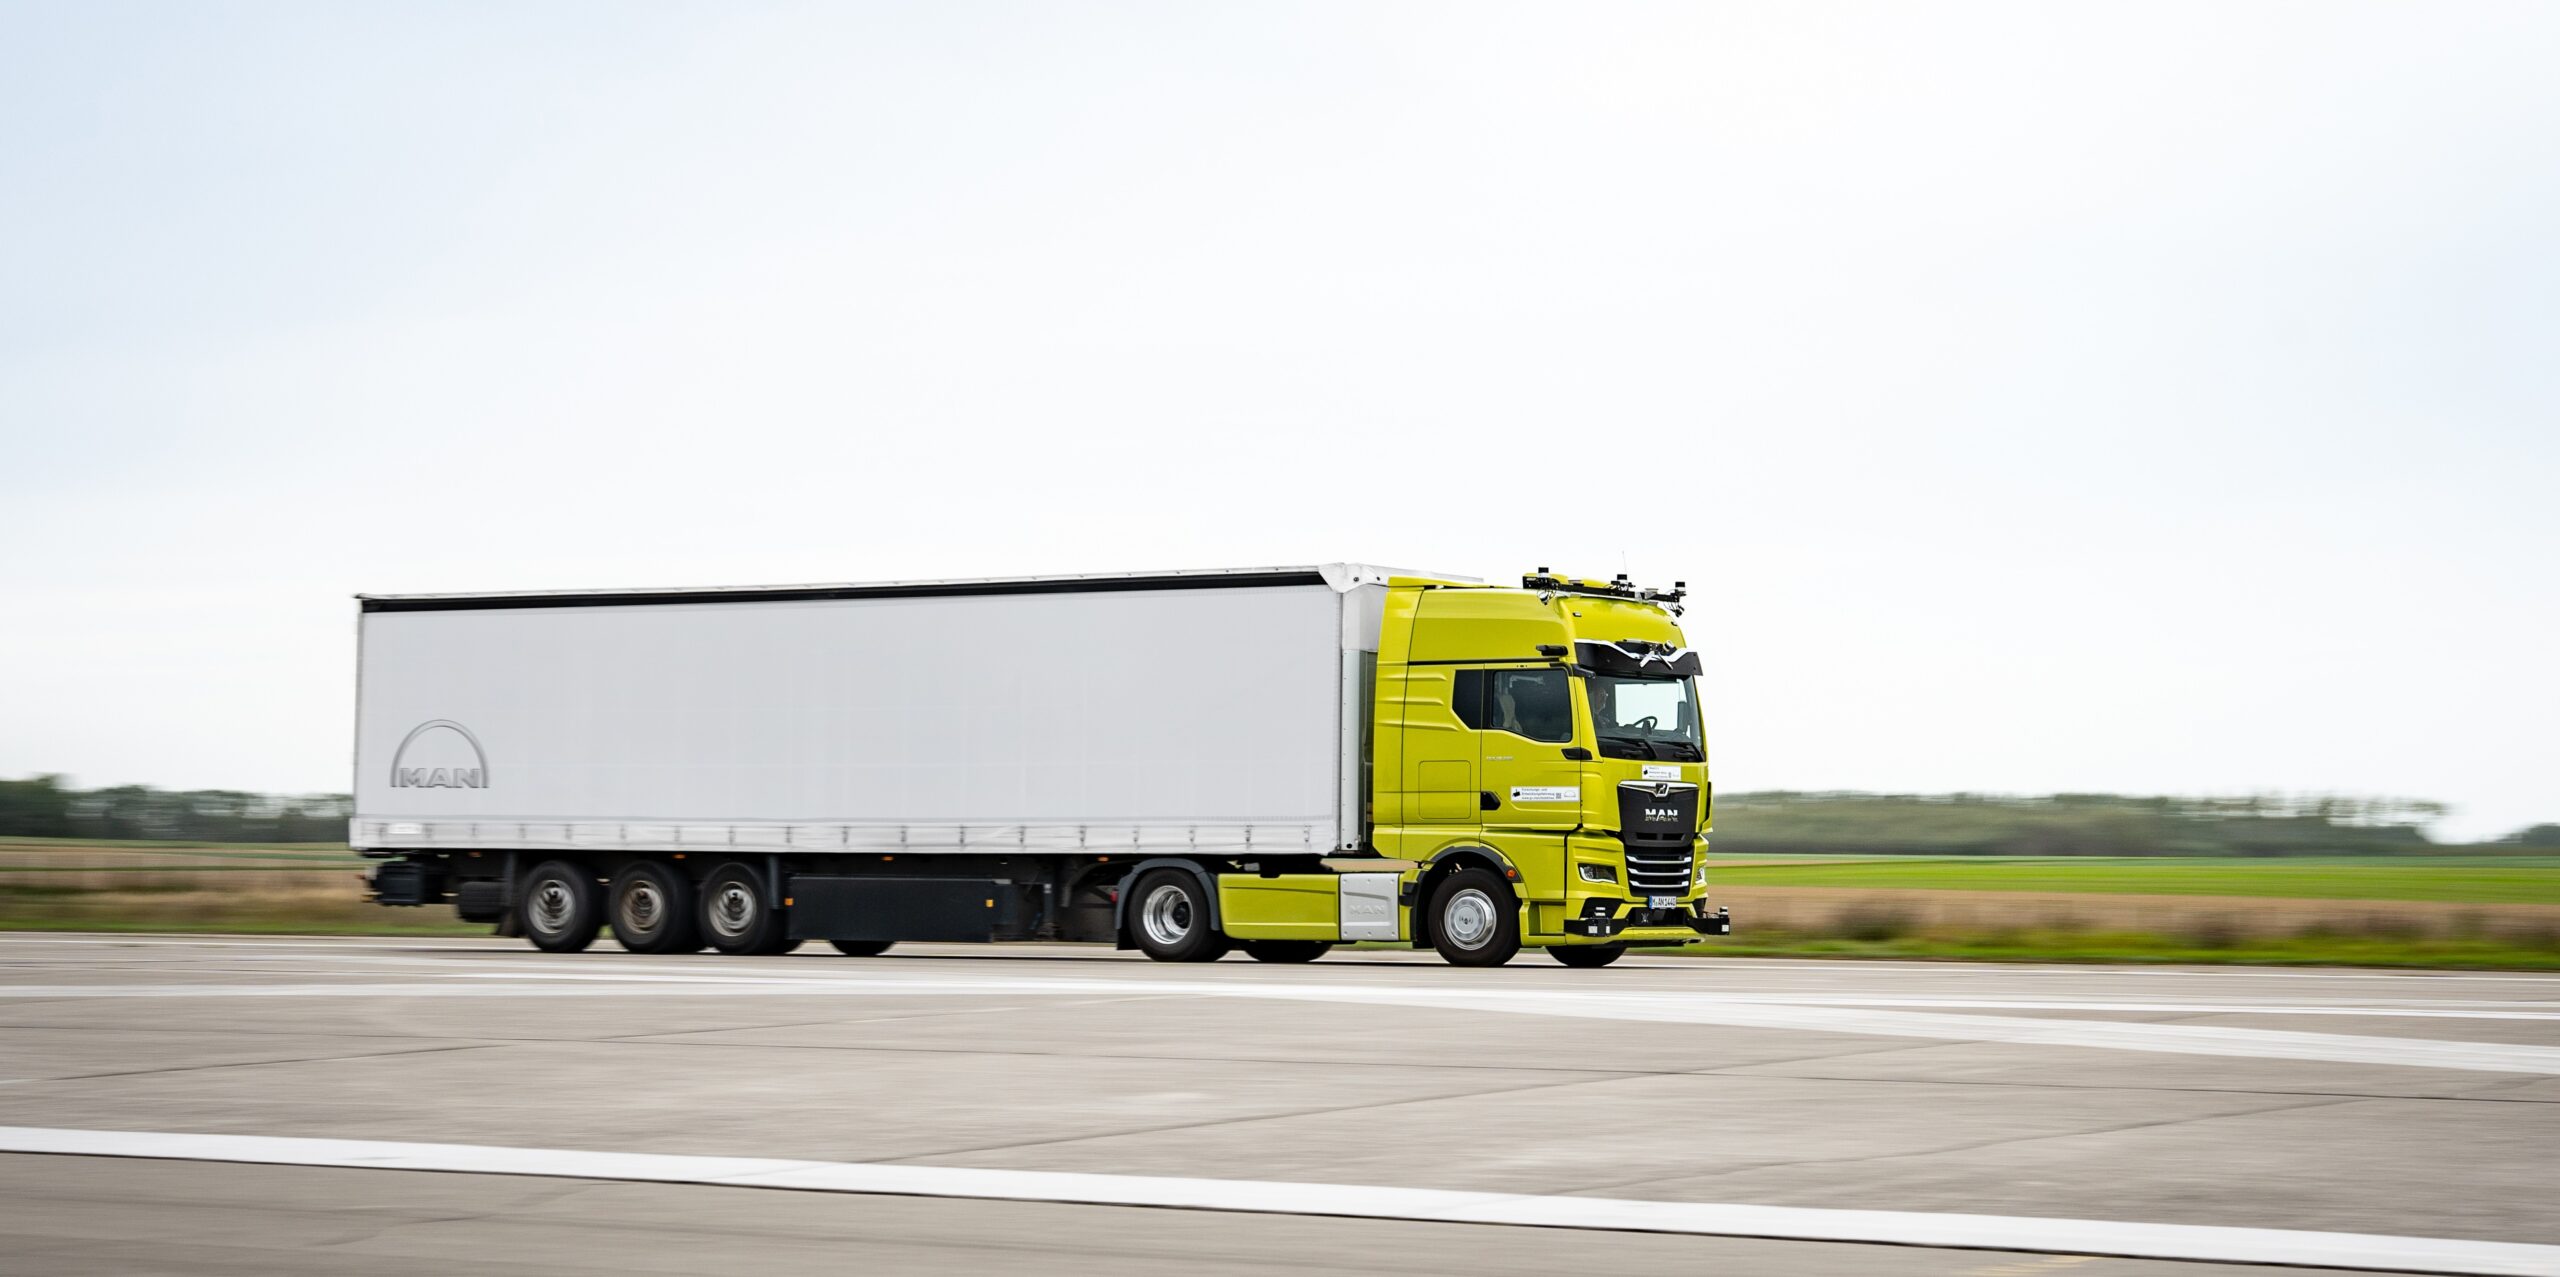 New development partnership with Plus aims for real-life use of autonomous trucks